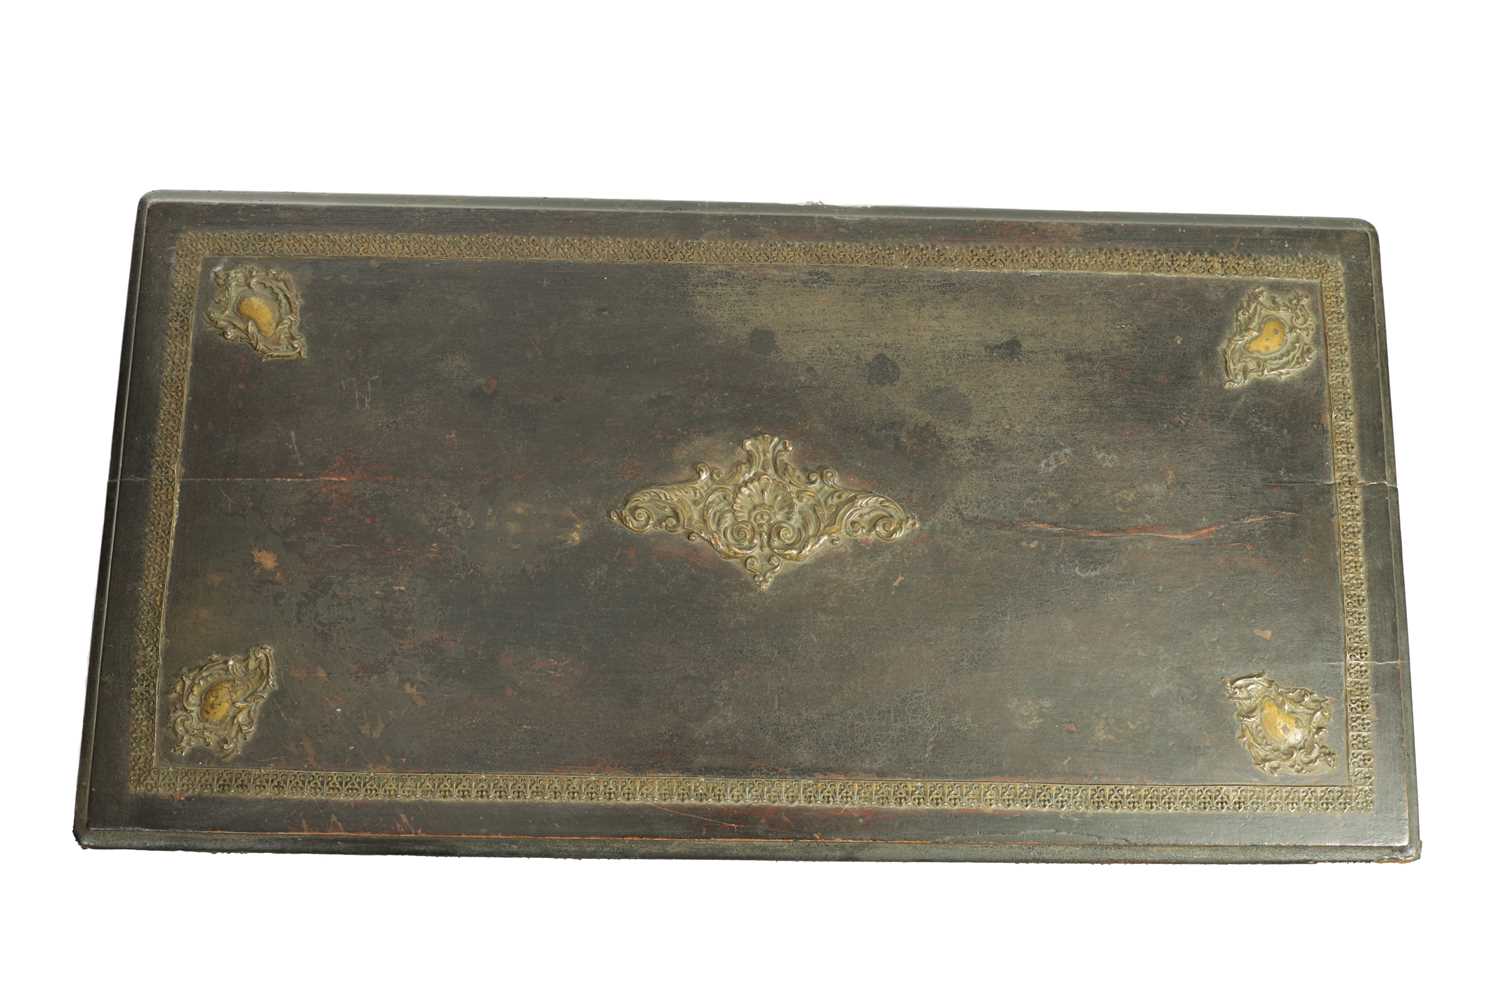 A VERY LARGE LATE 19TH CENTURY SWISS ORCHESTRAL MUSIC BOX - Image 11 of 11